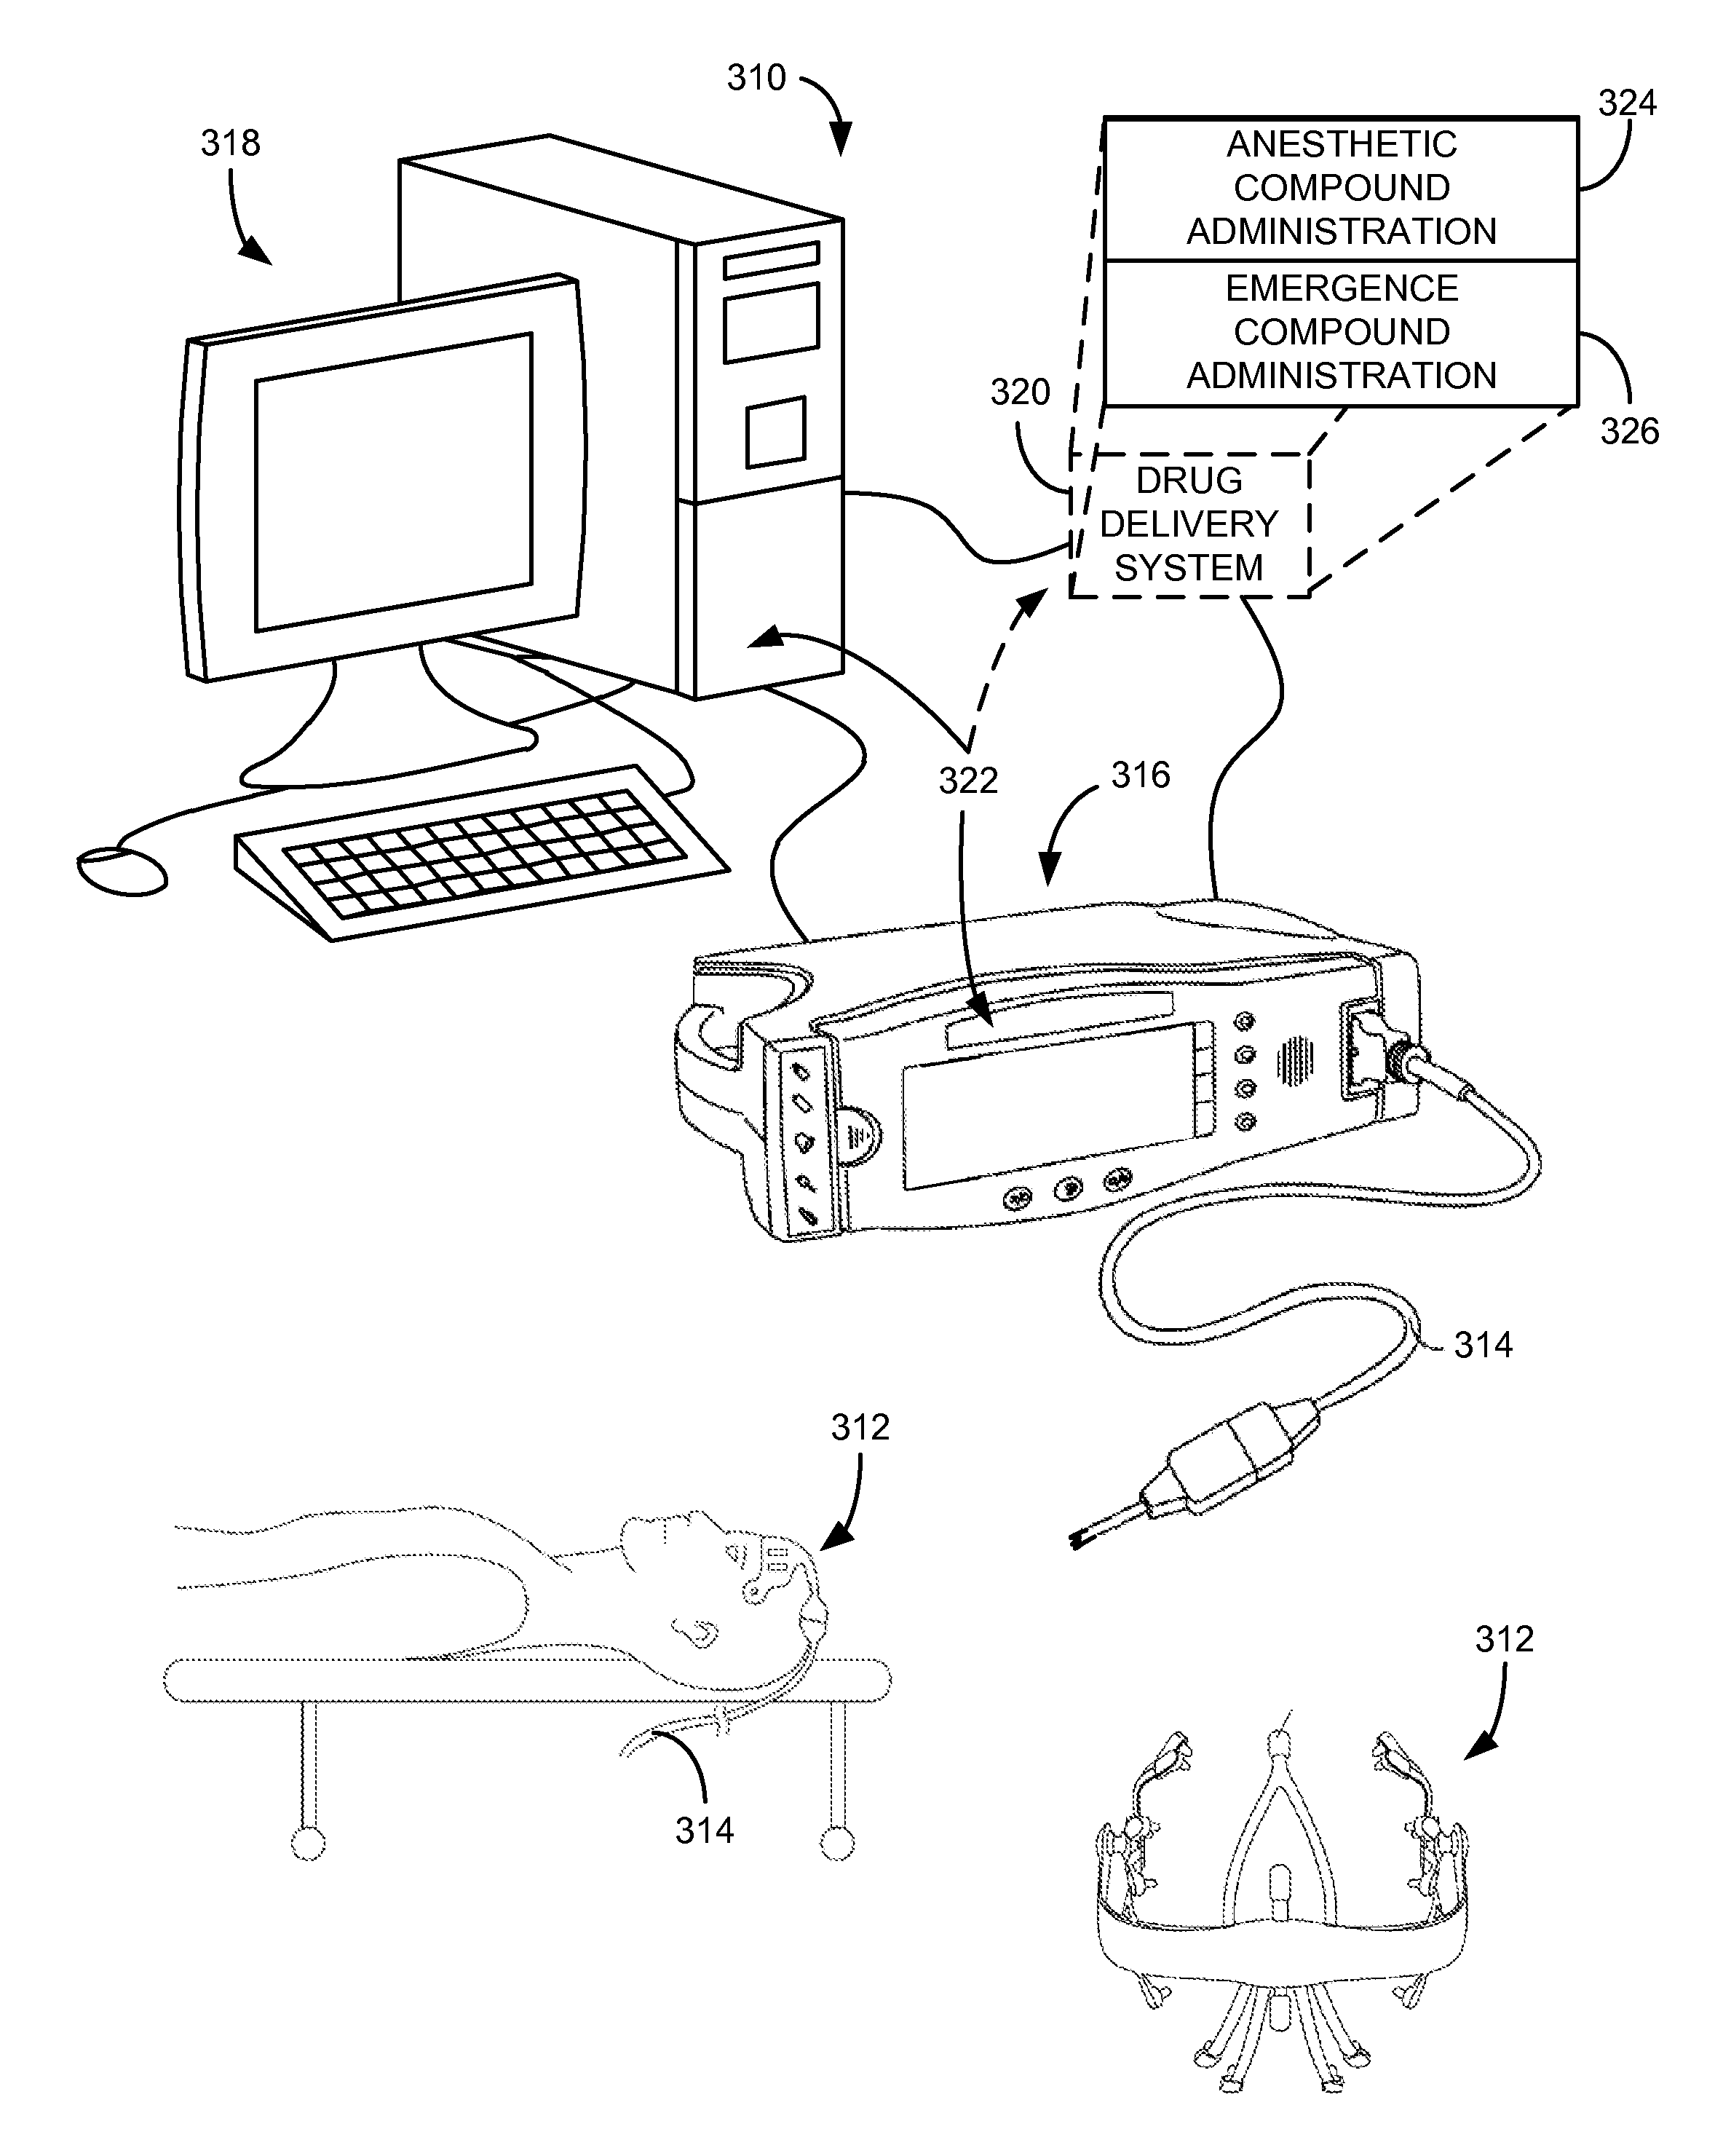 System and method for monitoring anesthesia and sedation using measures of brain coherence and synchrony